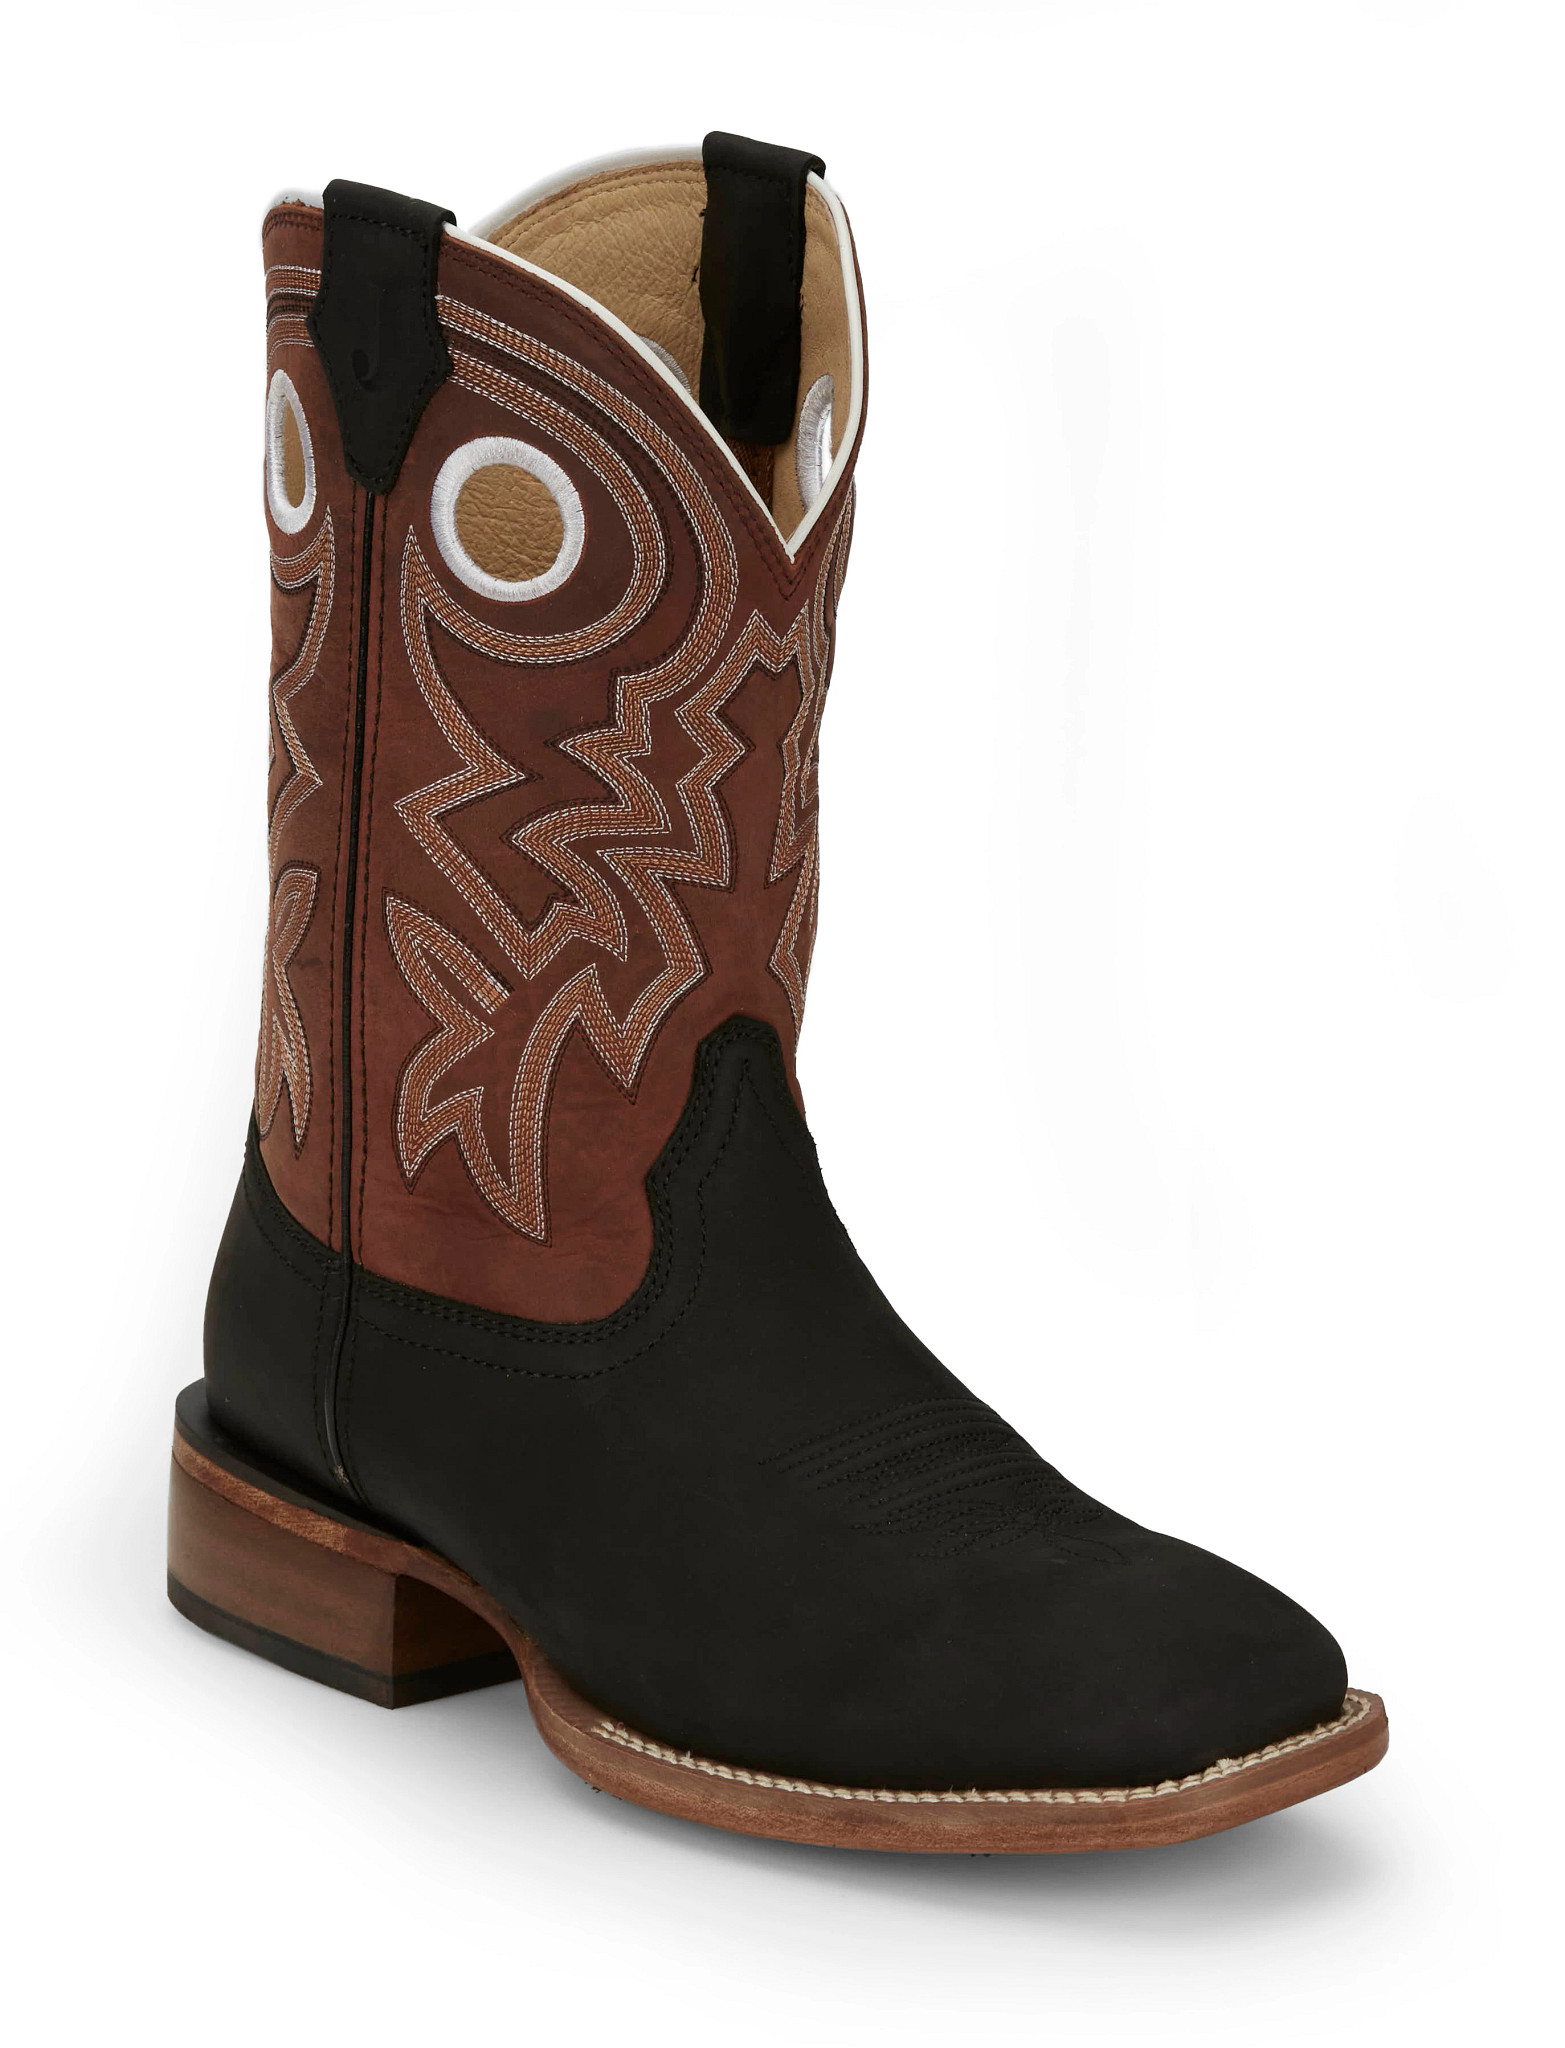 Justin Boots | Shop Best Selling Cowboy Boots | Official Site